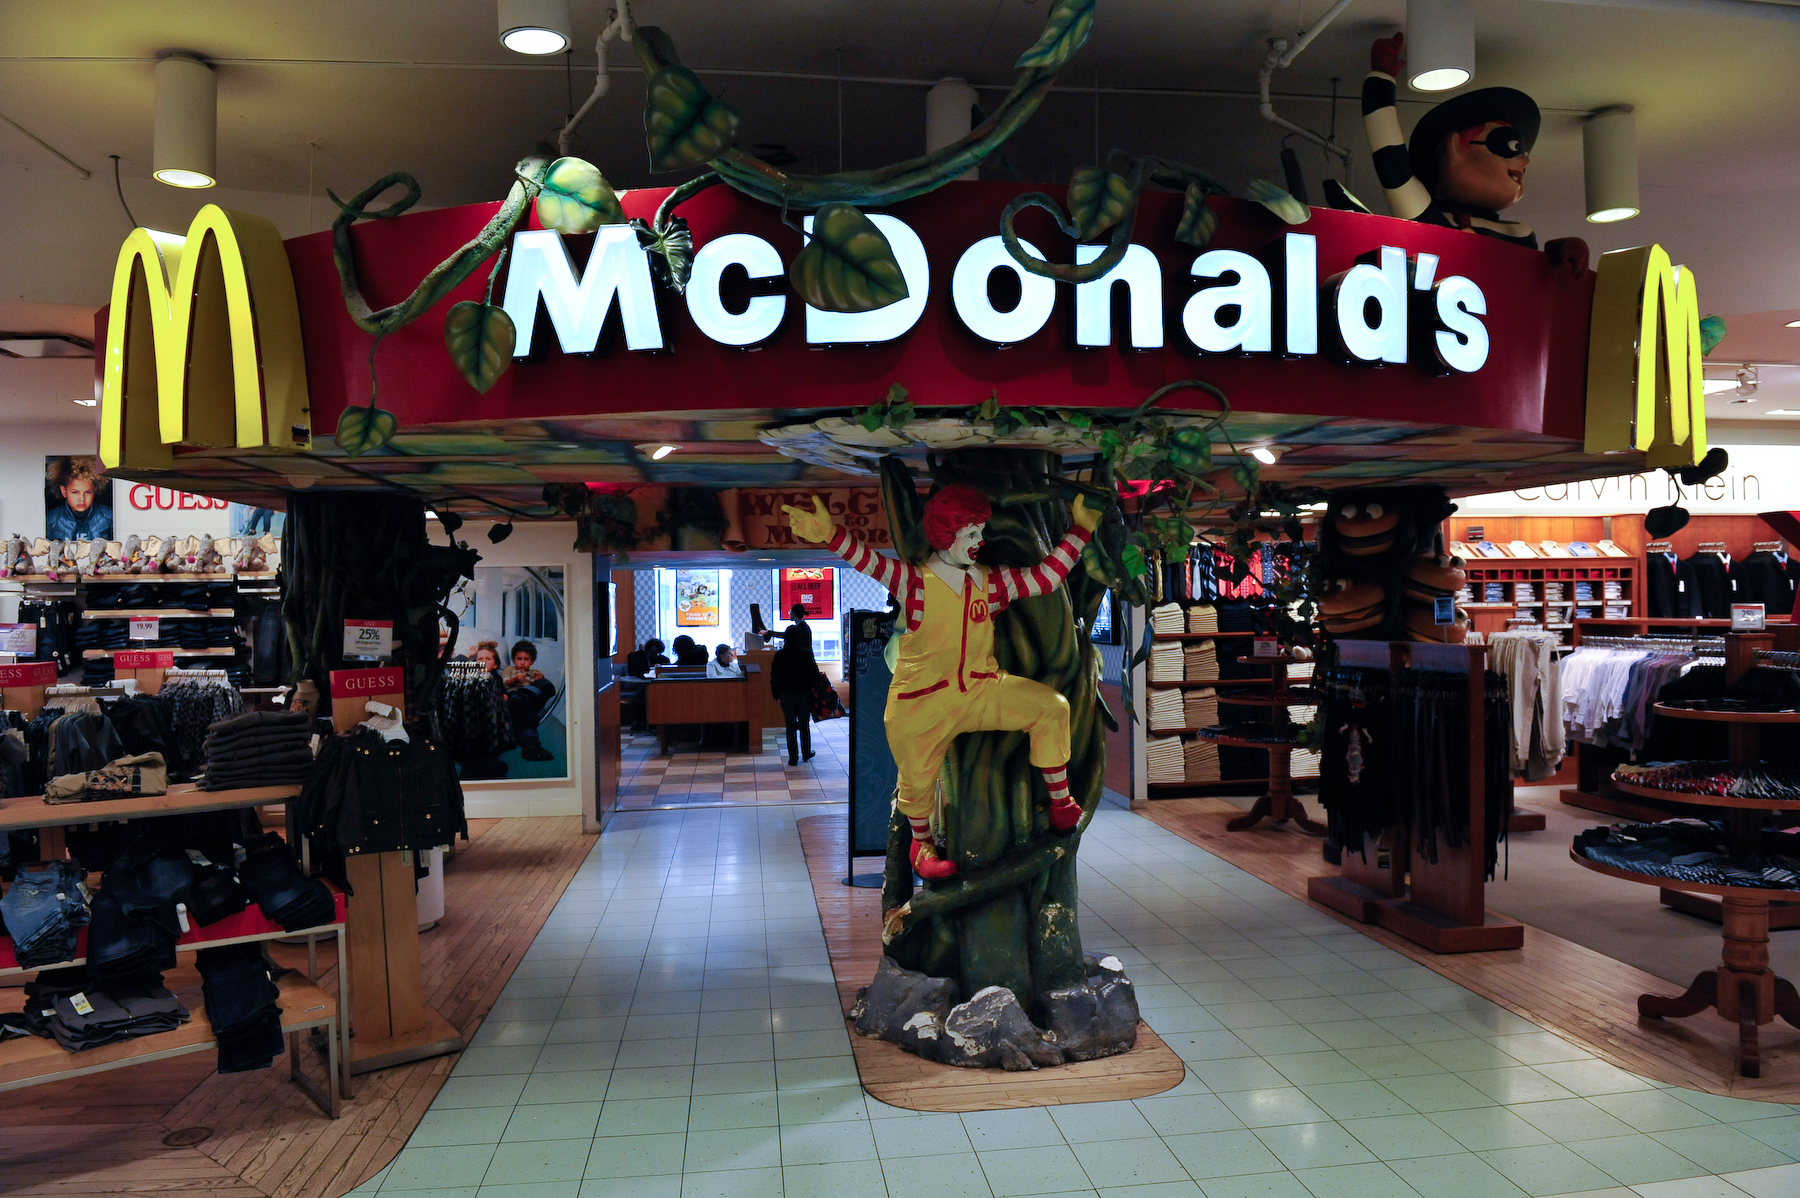 the entrance to mcdonald's is shown in this po